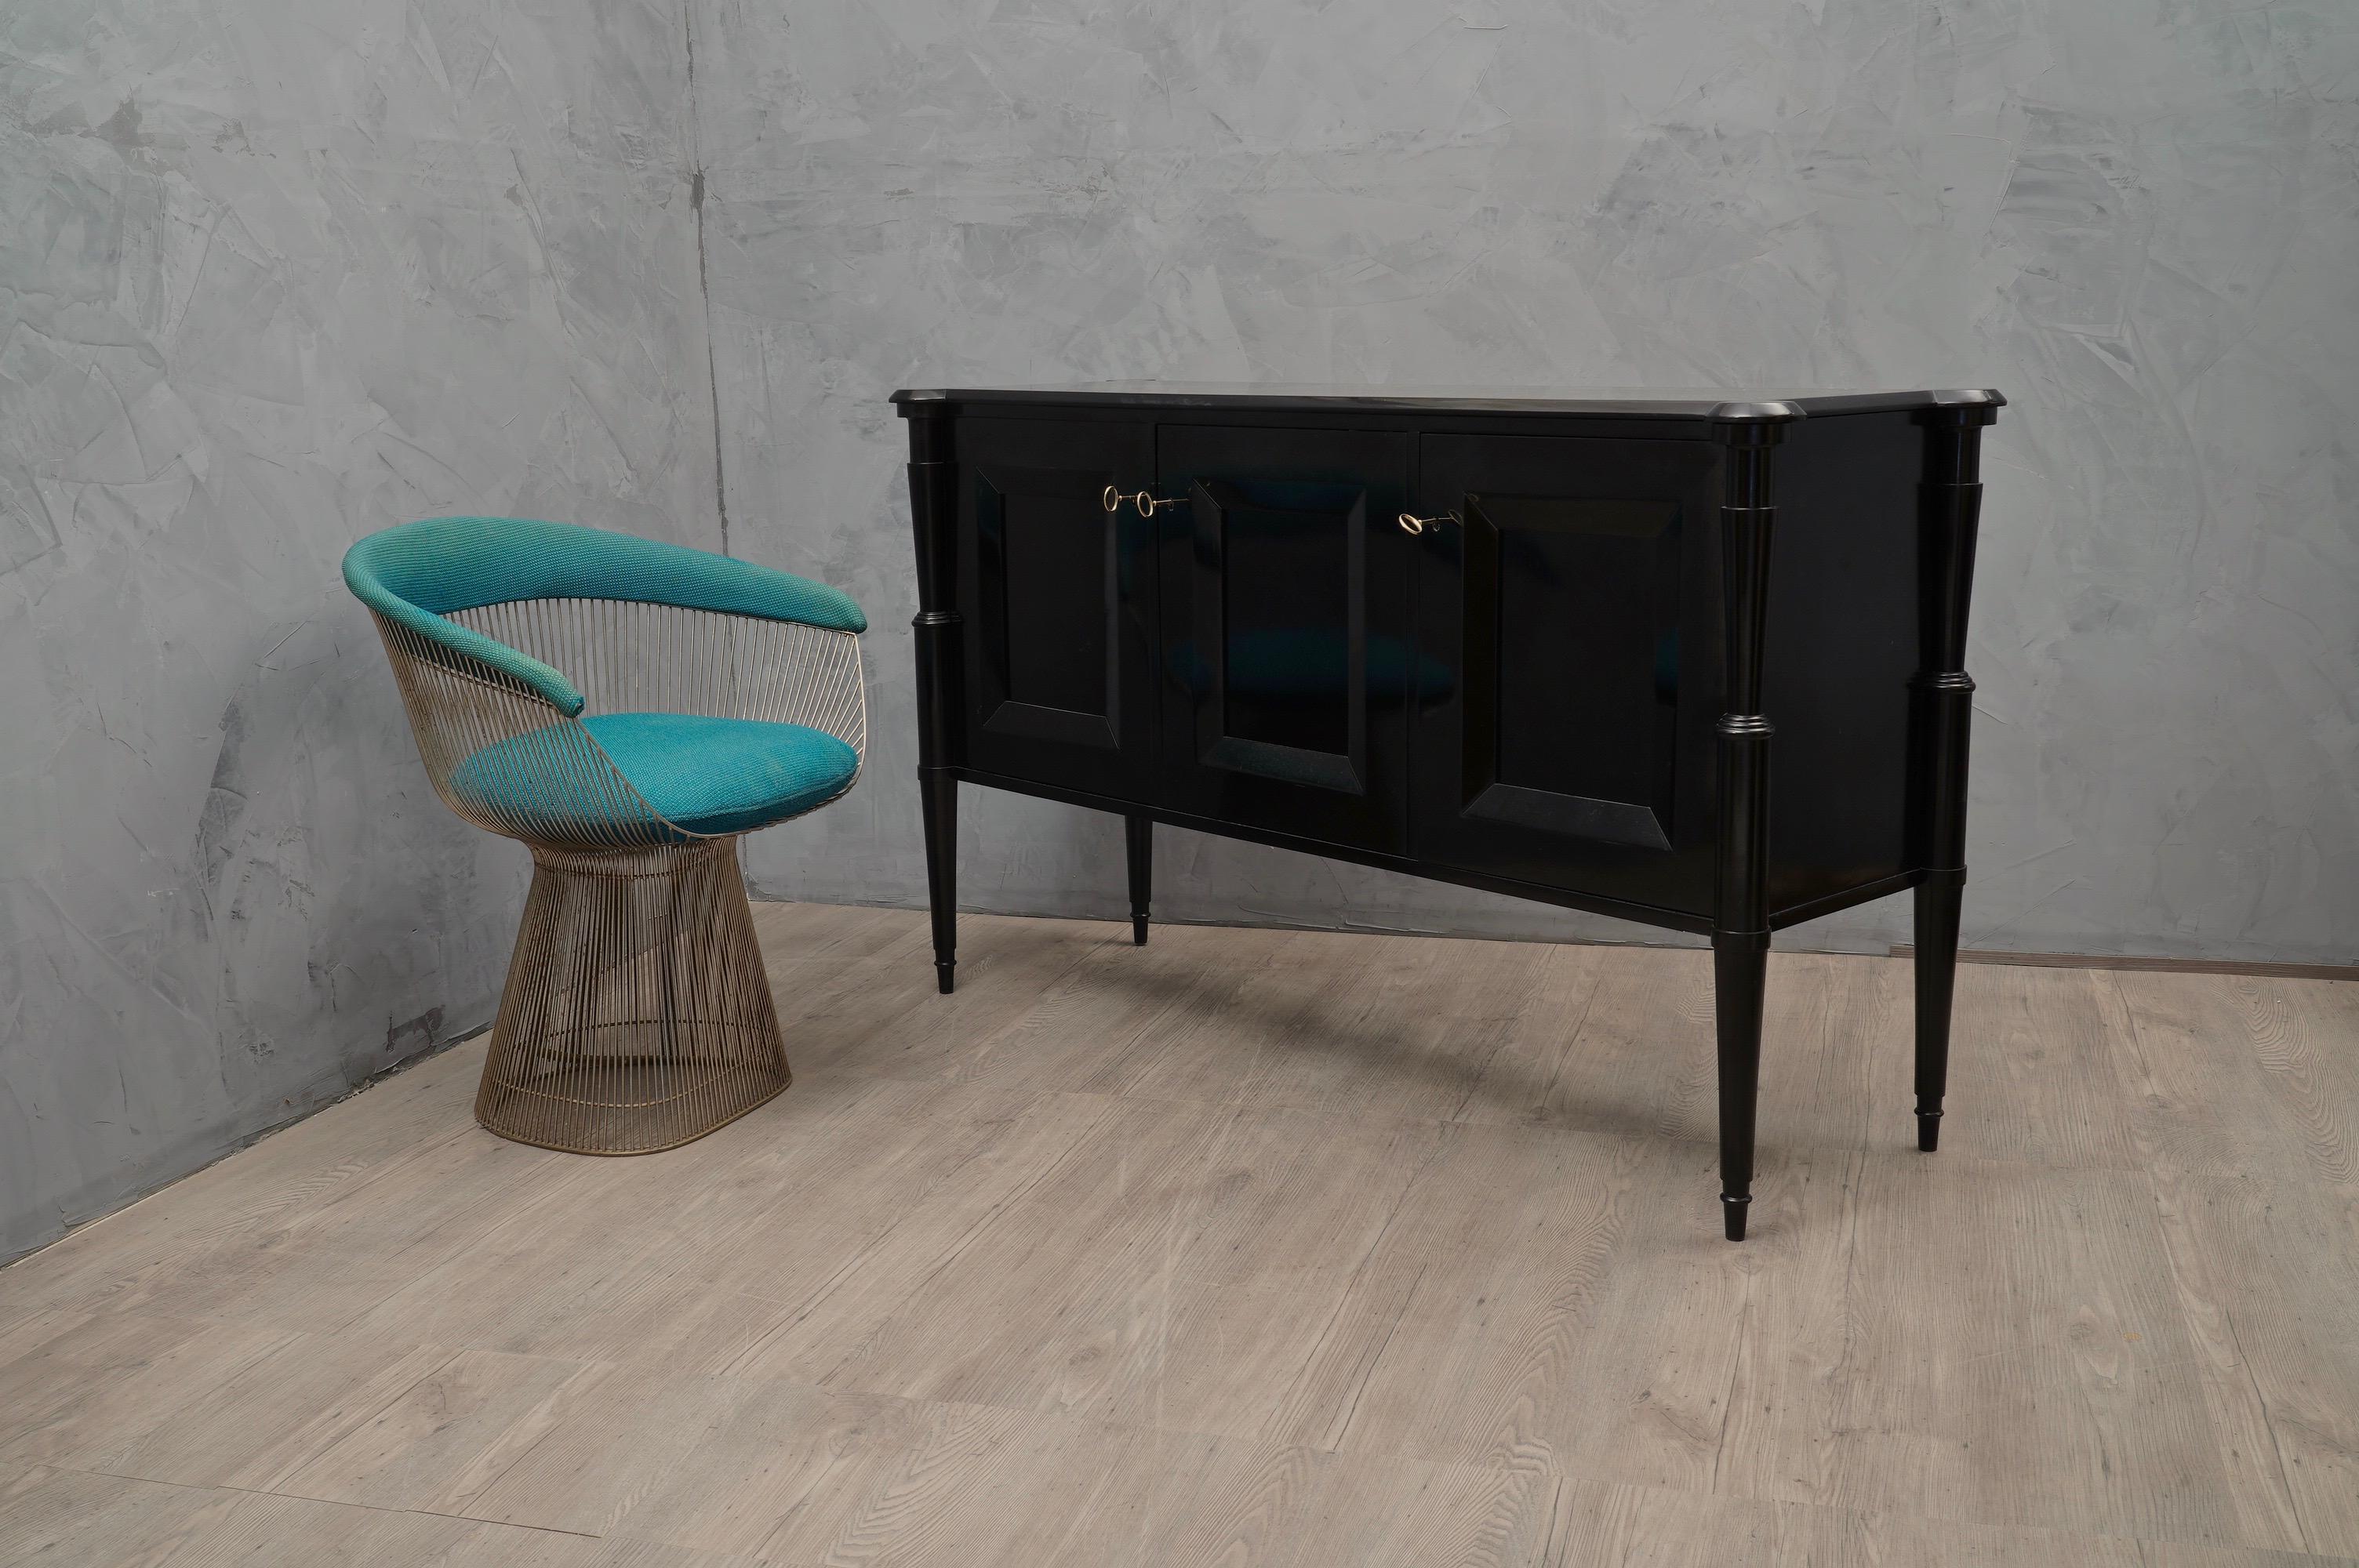 Important sideboard with the characteristic Italian style of Paolo Buffa, Vittorio Dassi and Osvaldo Borsani. All in elegant polishing in black shellac.

The sideboard has its own characteristic style, with particular workmanship on the four corners